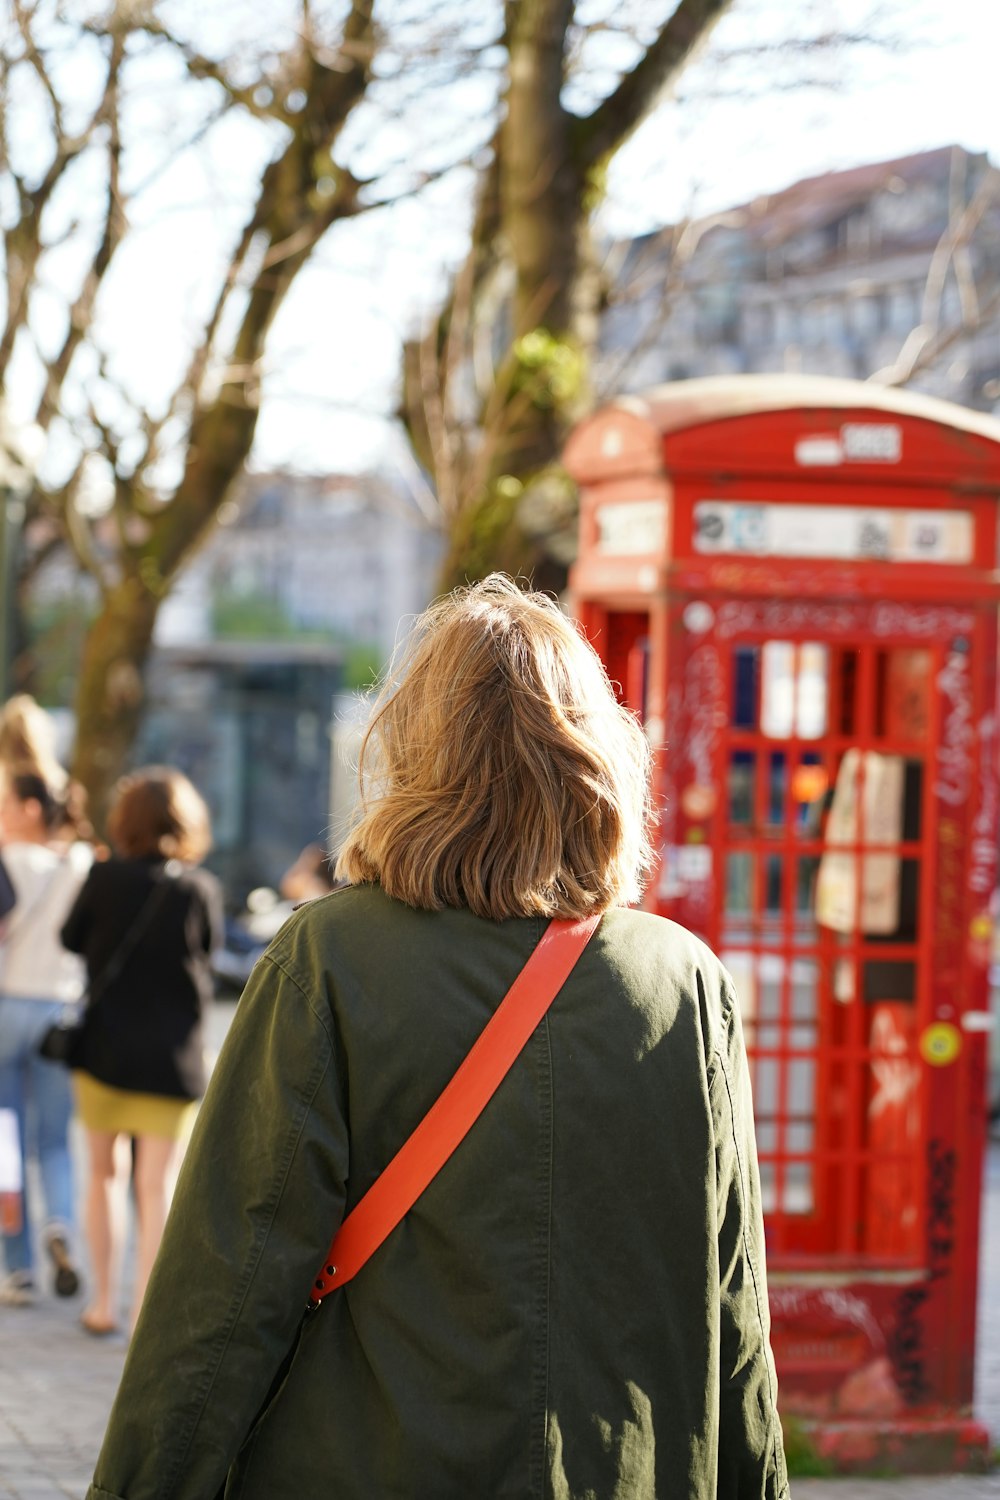 a woman walking down a street past a red phone booth